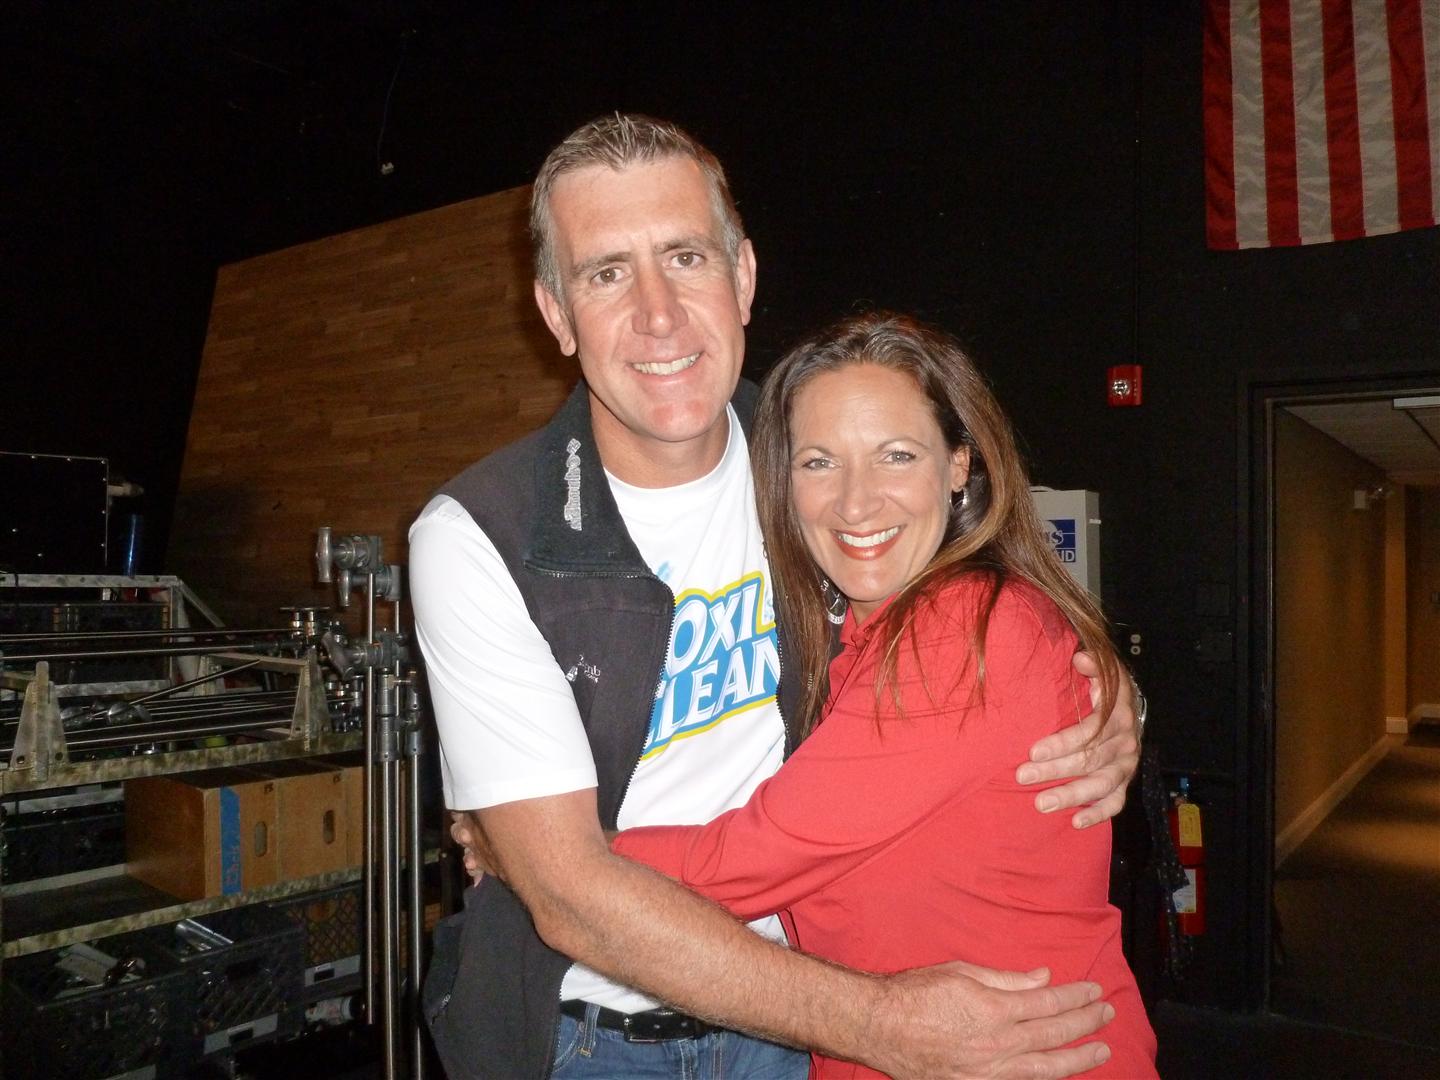 Donna Palm and Oxiclean Pitchman Anthony Sullivan during commercial shoot